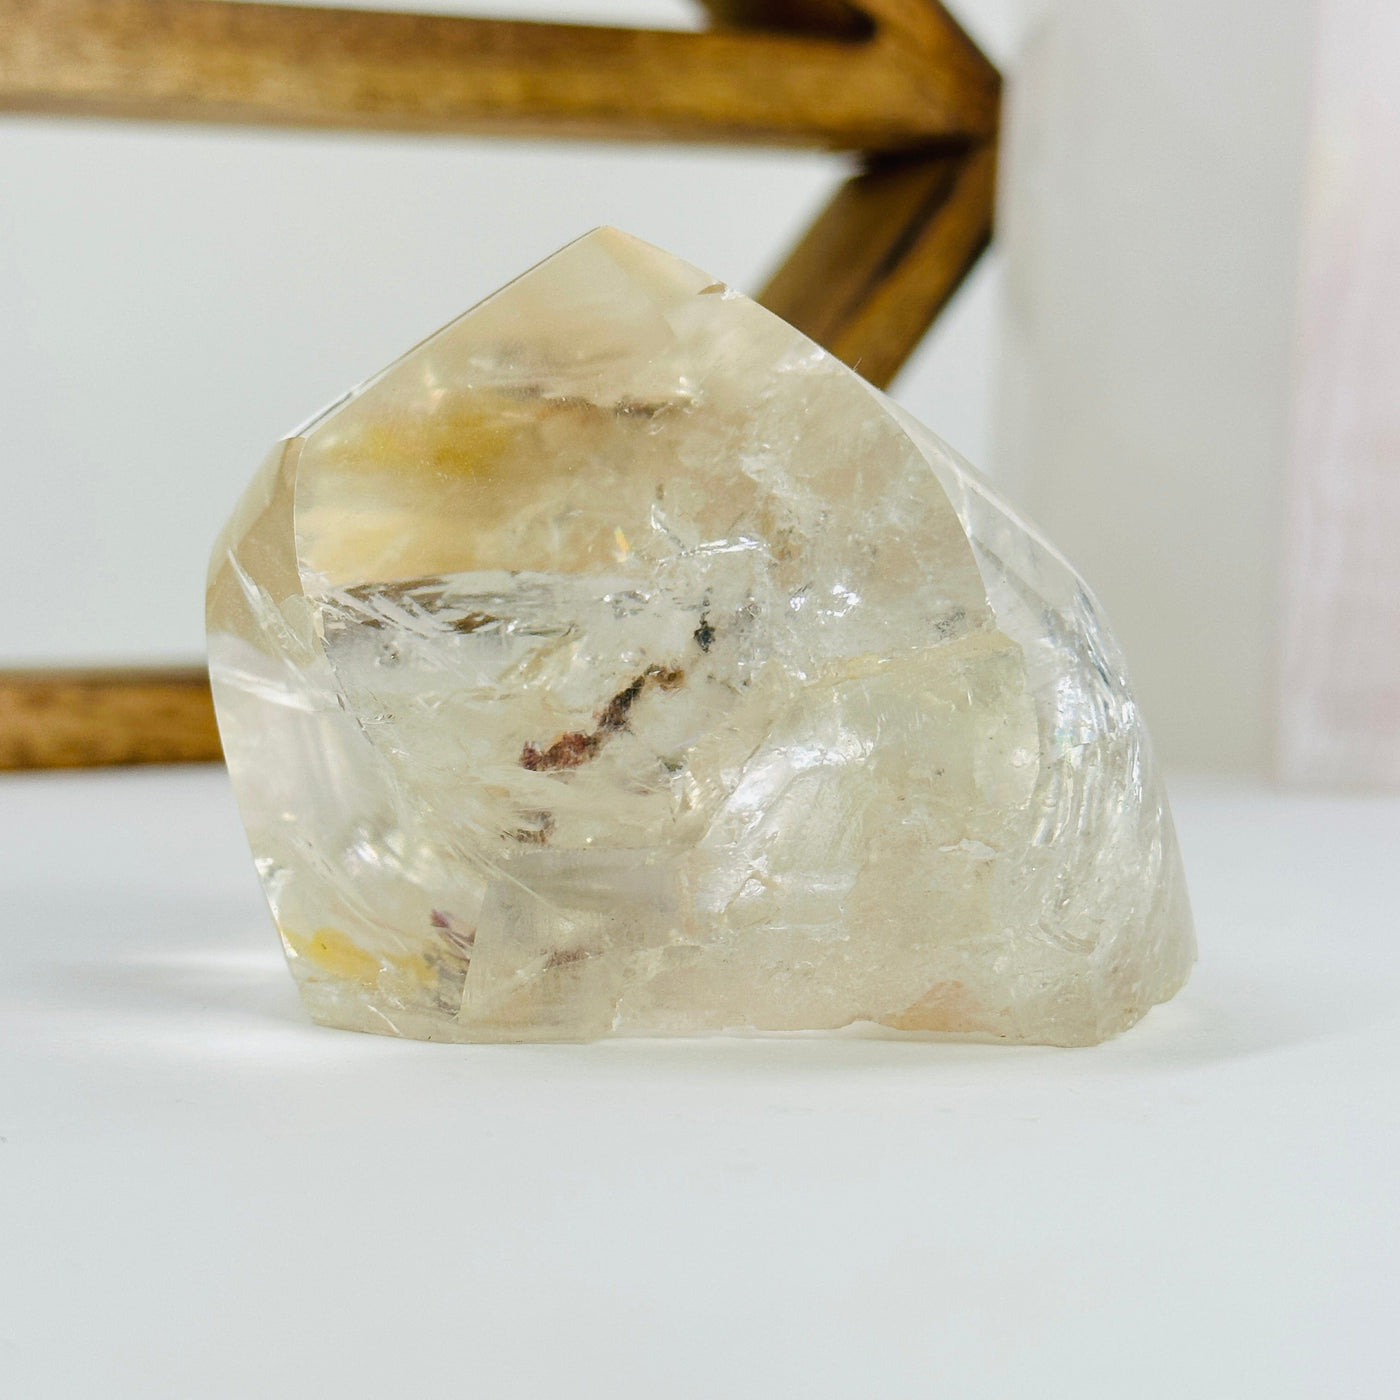 polished crystal quartz with decorations in the background